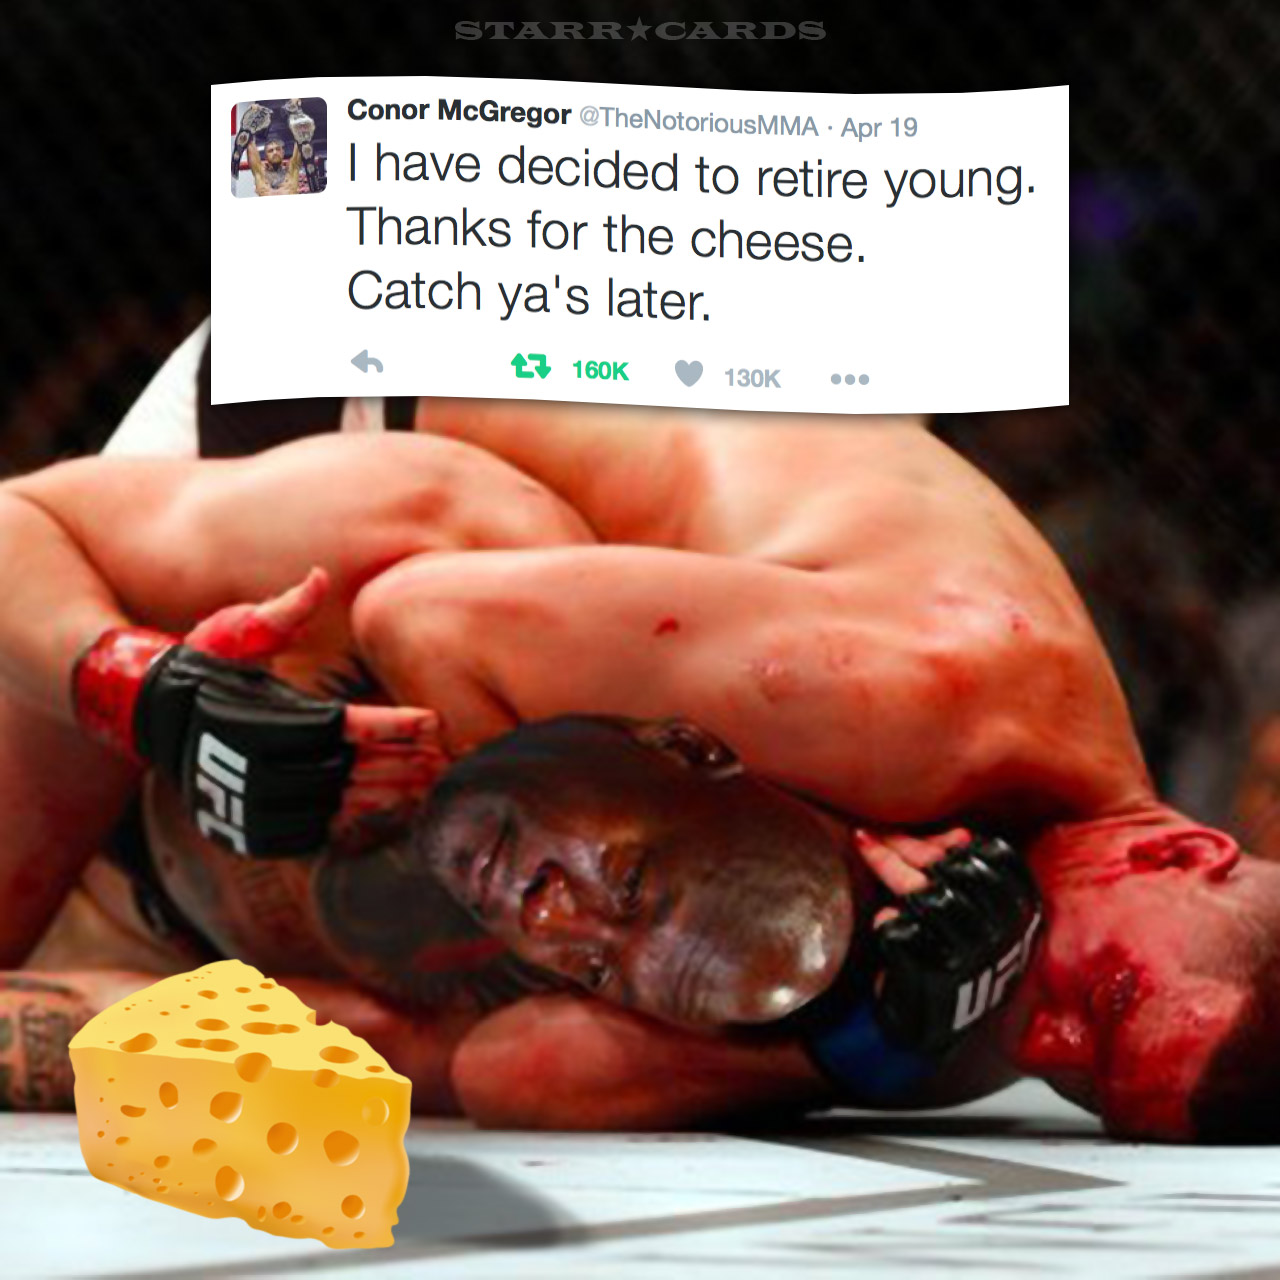 UFC fighter Conor McGregor retires with his cheese